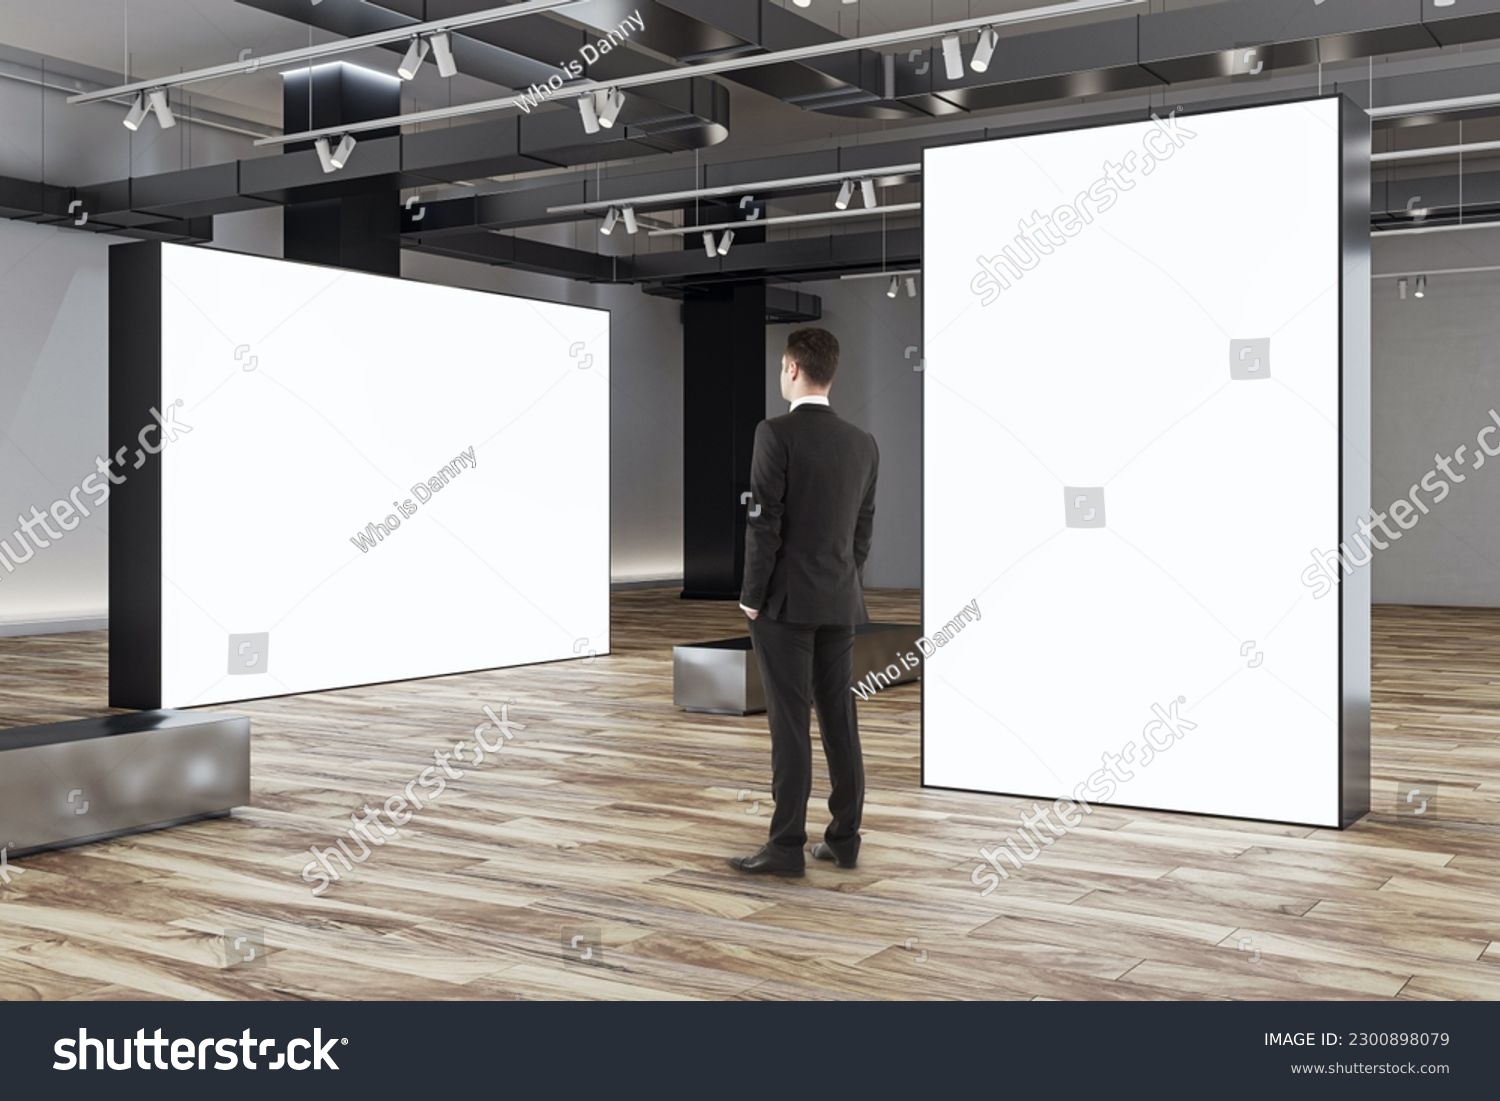 Businessman looks at blank white partitions with place for advertising poster or marketing campaign in stylish gallery hall with metallic benches on wooden floor and grey wall background, mockup #2300898079